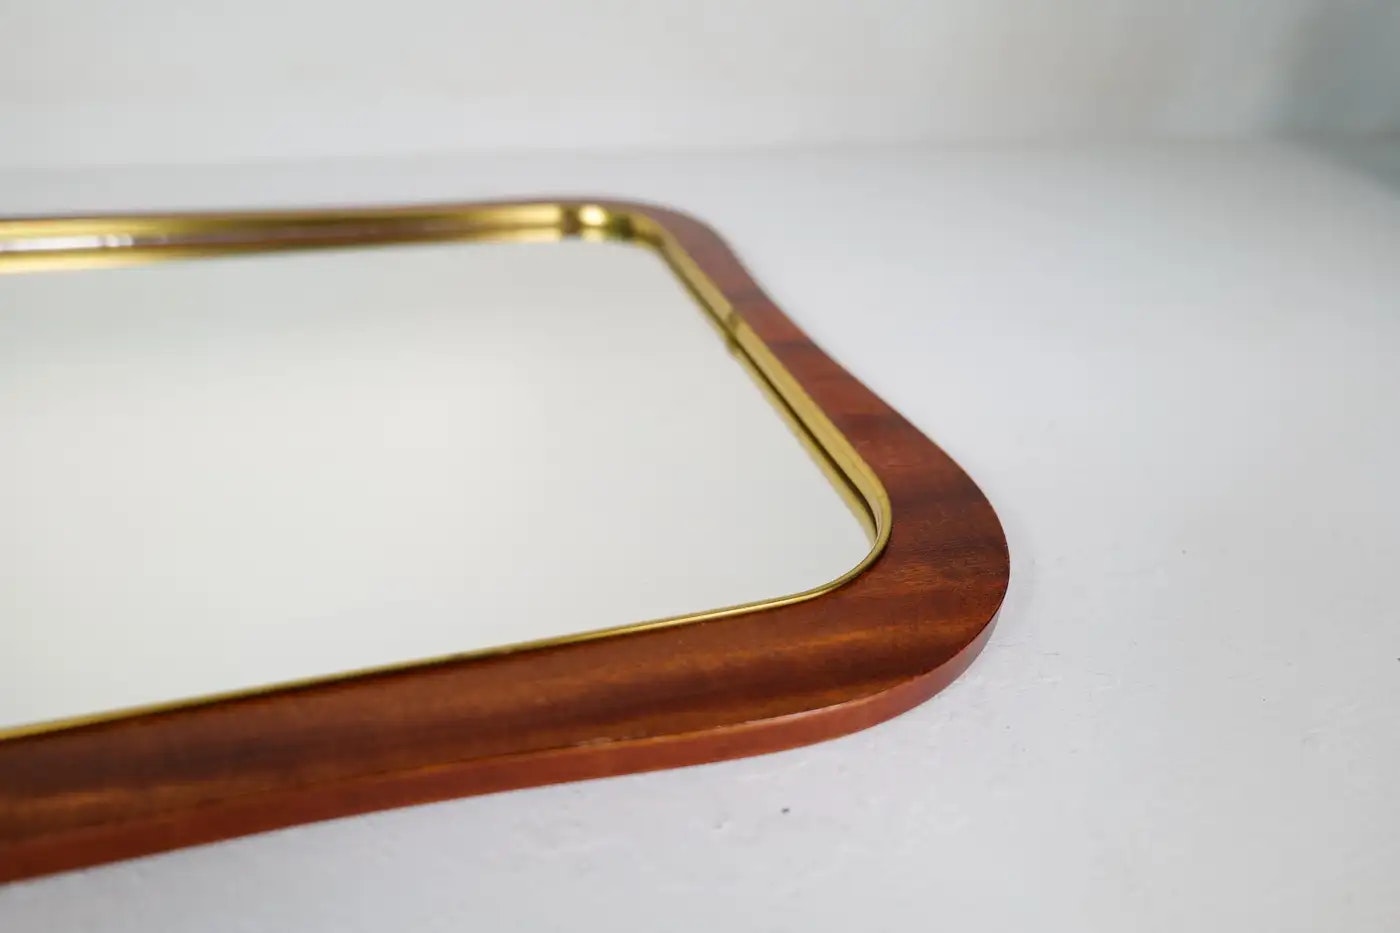 Midcentury Modern Pair of Wood and Brass Mirrors Sweden 1950s